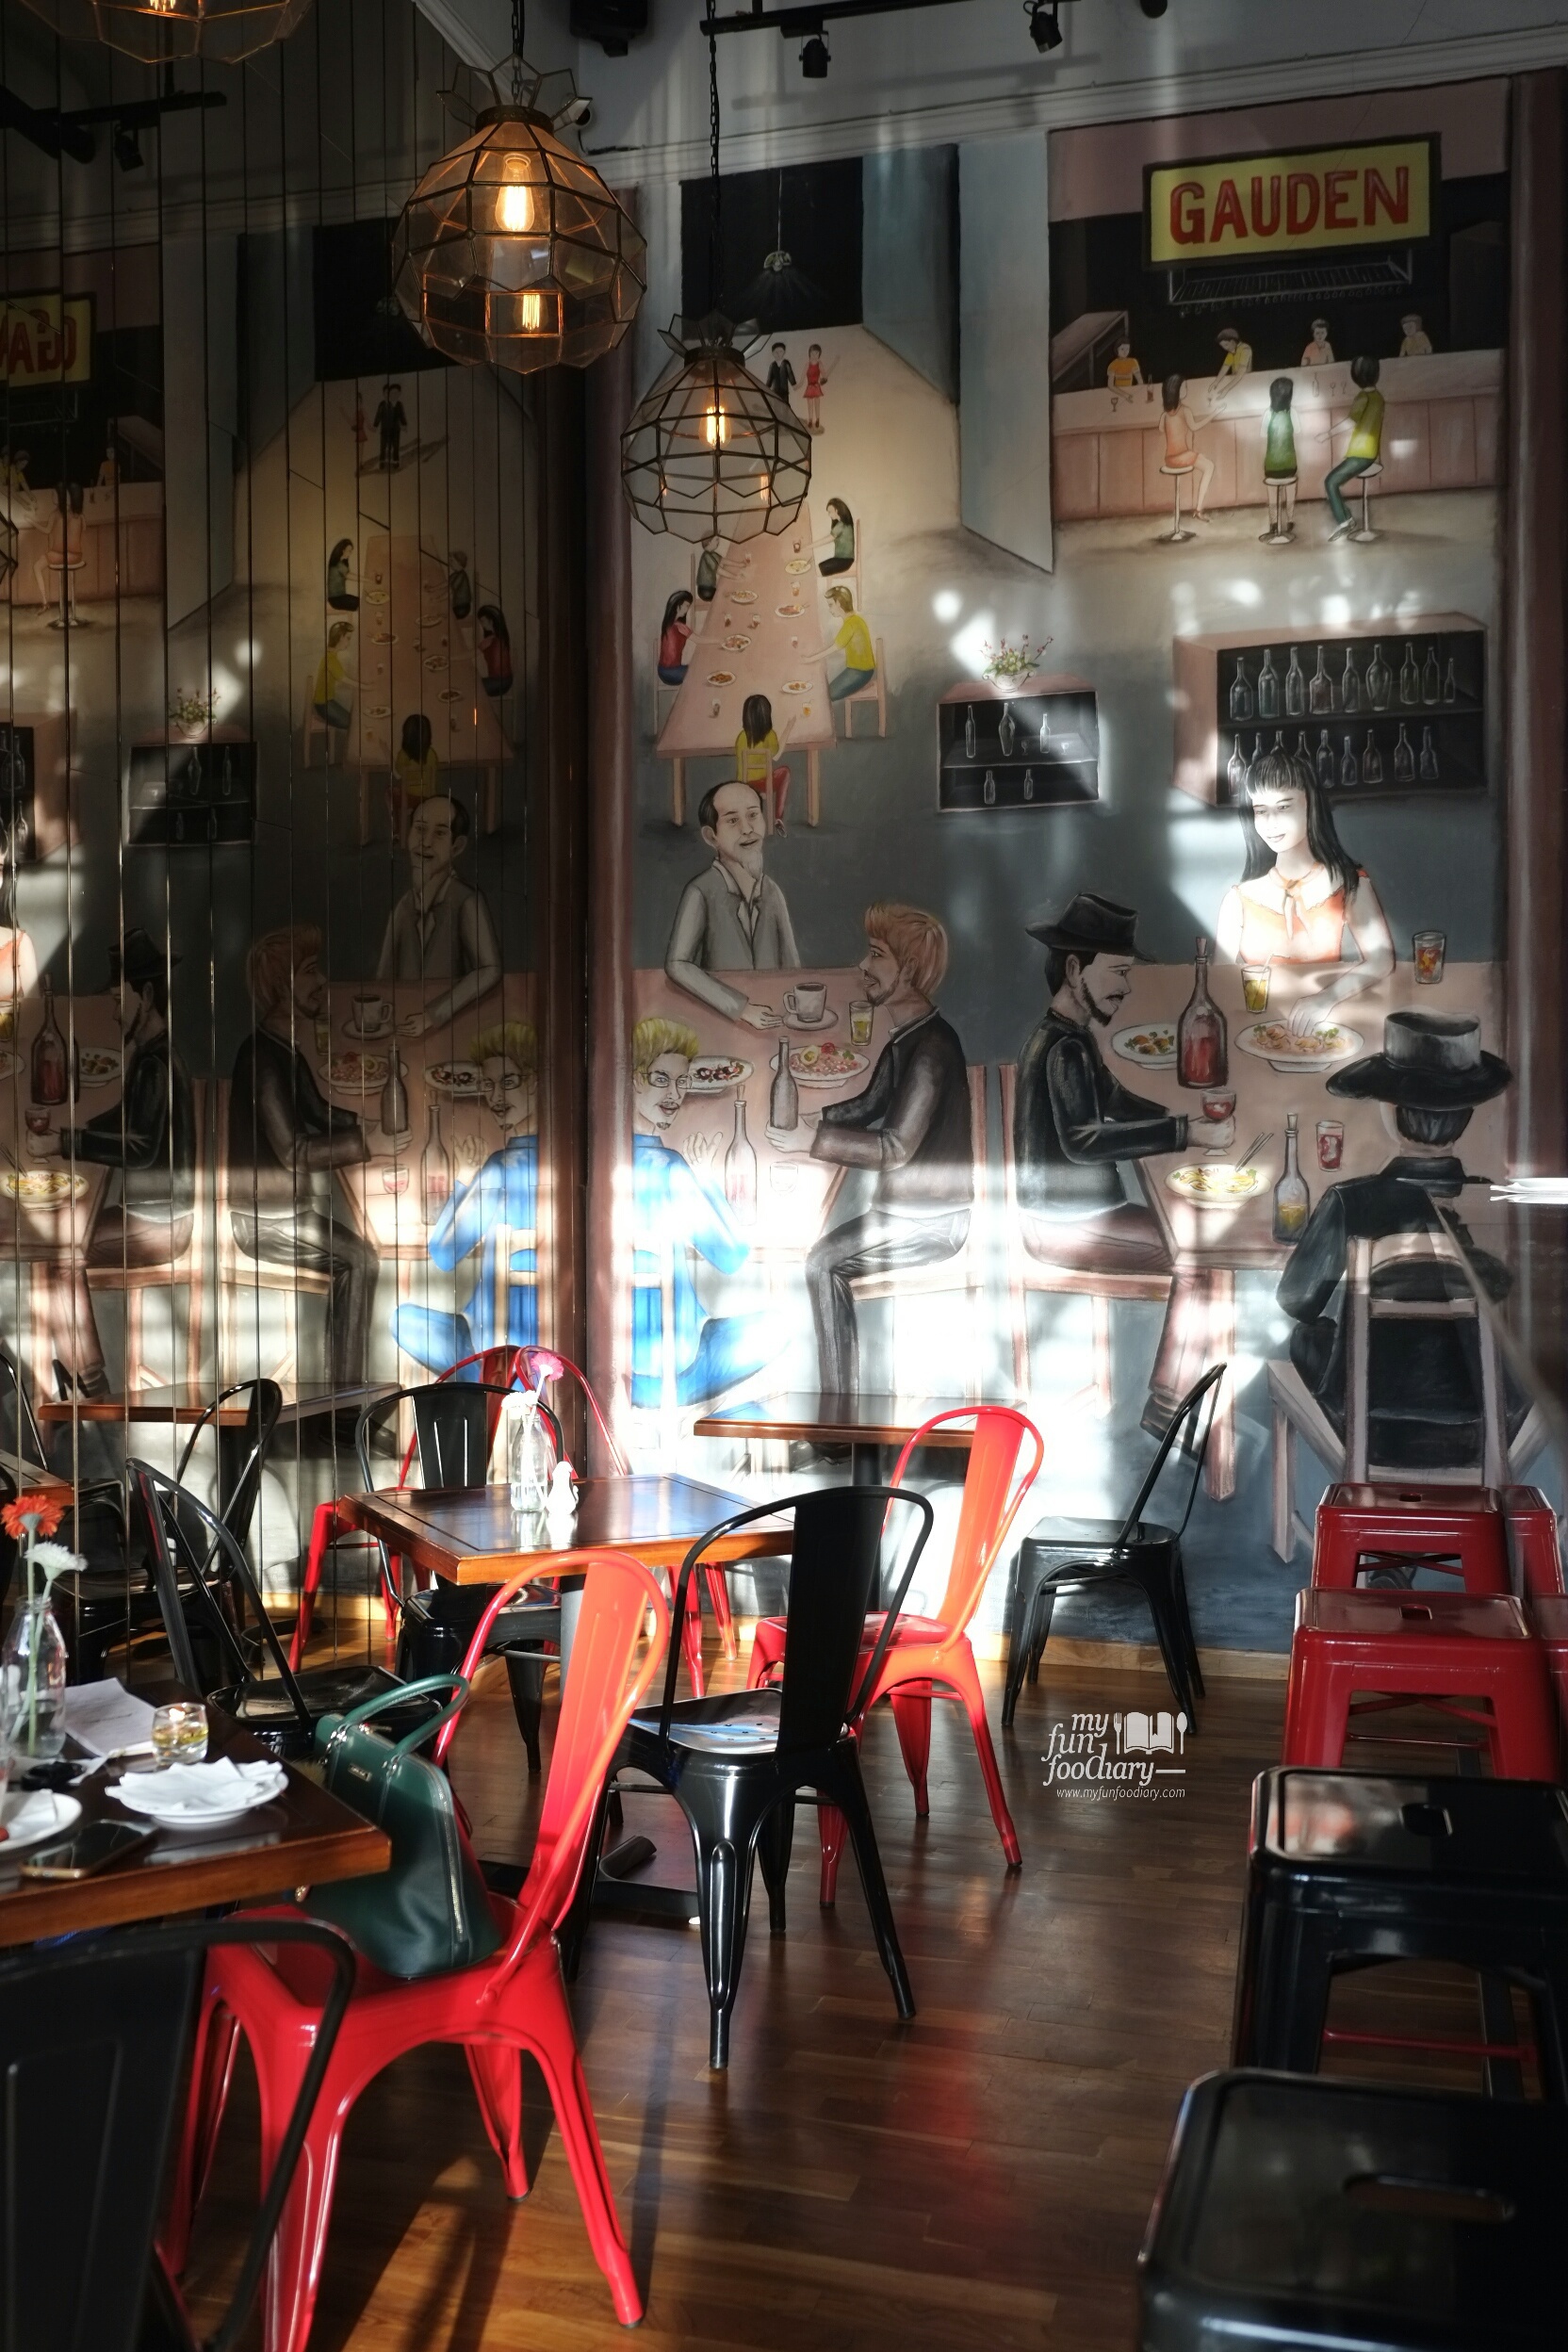 Indoor Ambiance at Gauden Cafe and Bar by Myfunfoodiary